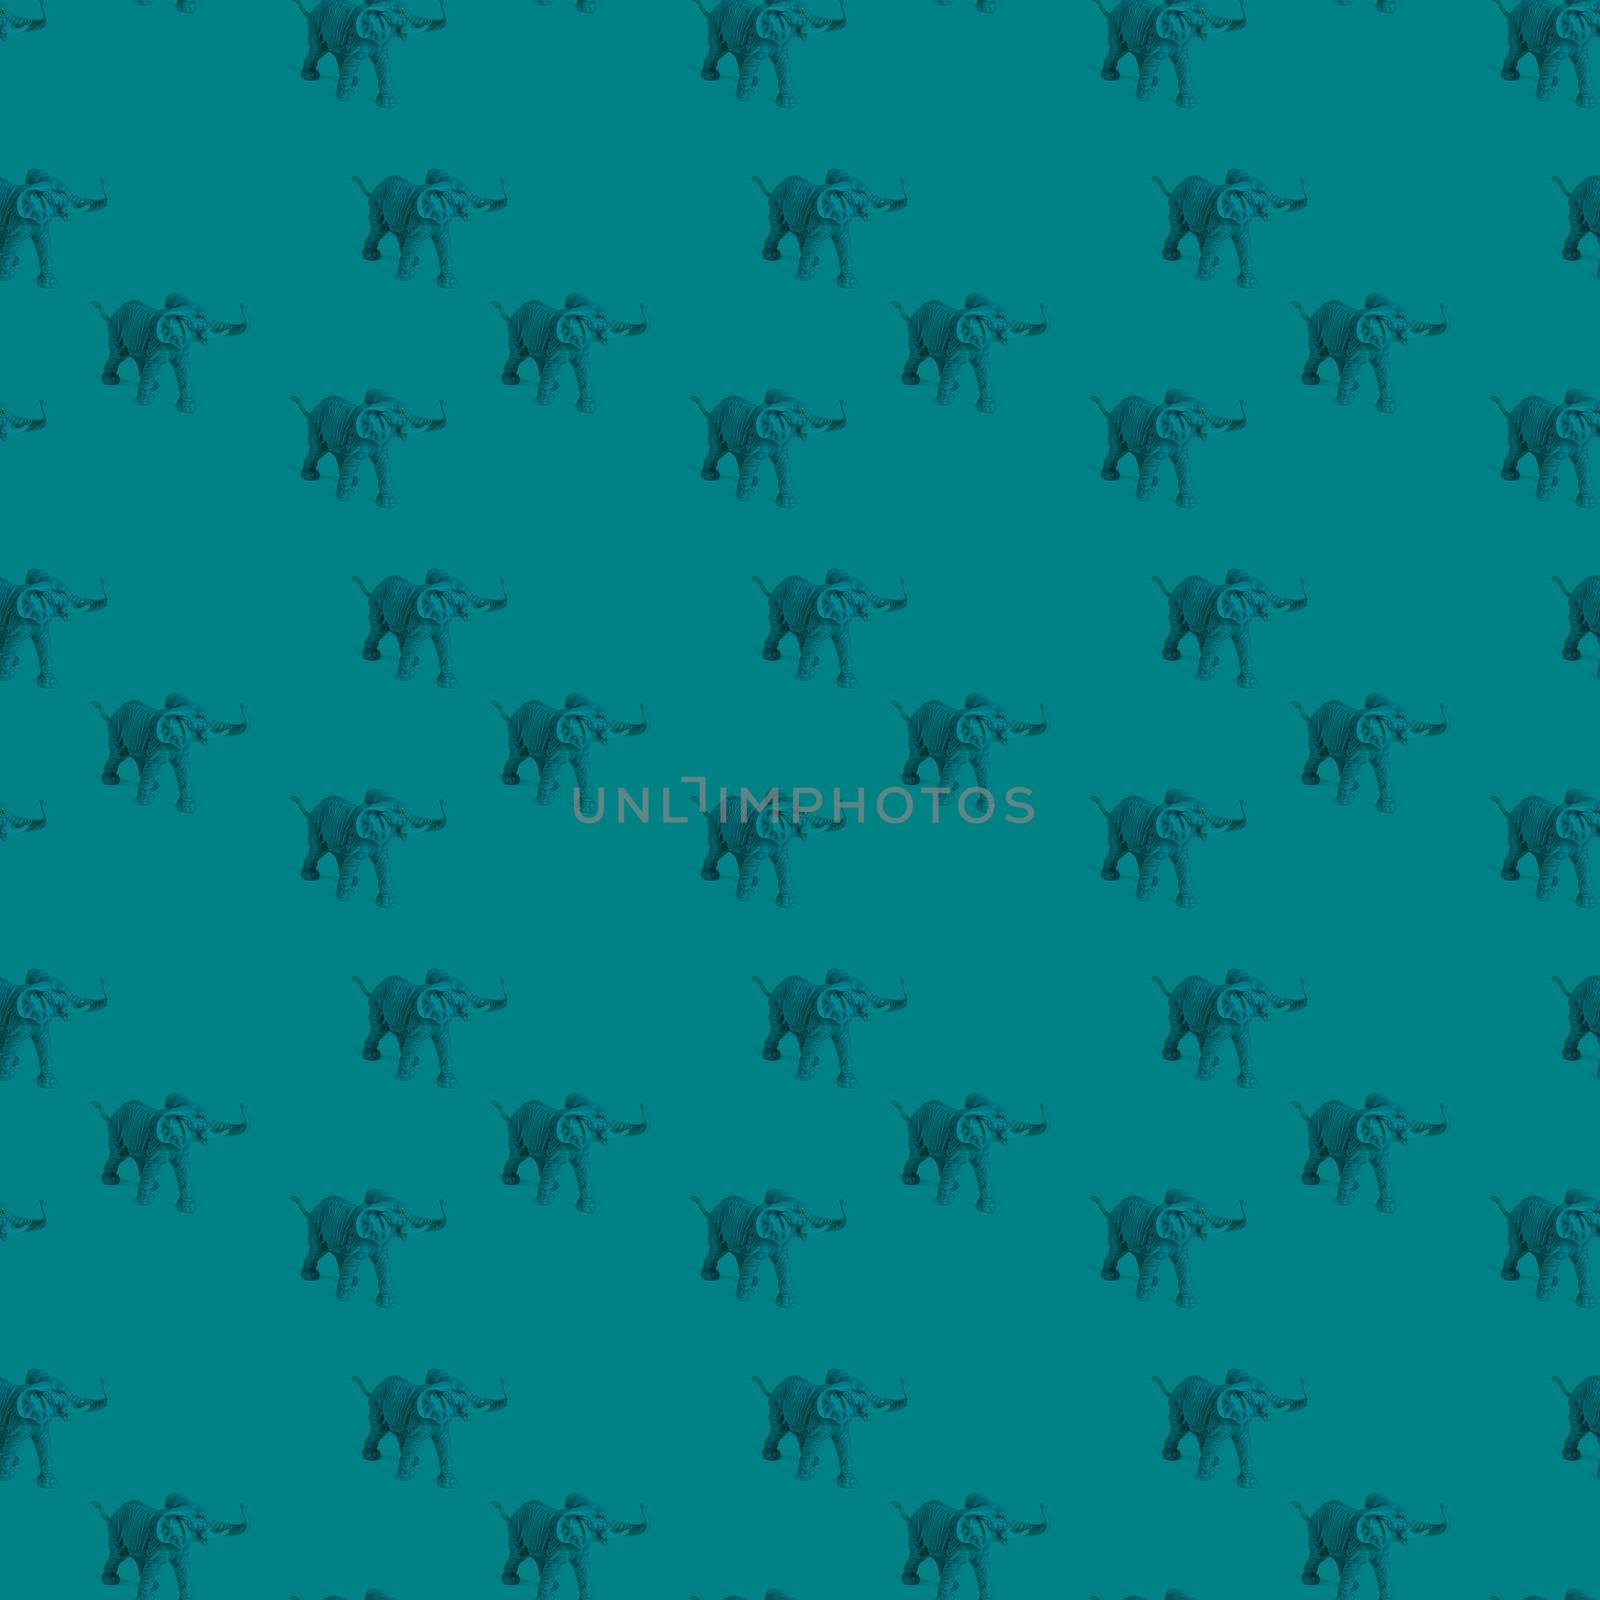 Seamless pattern with abstract elephants in a single color by bySergPo